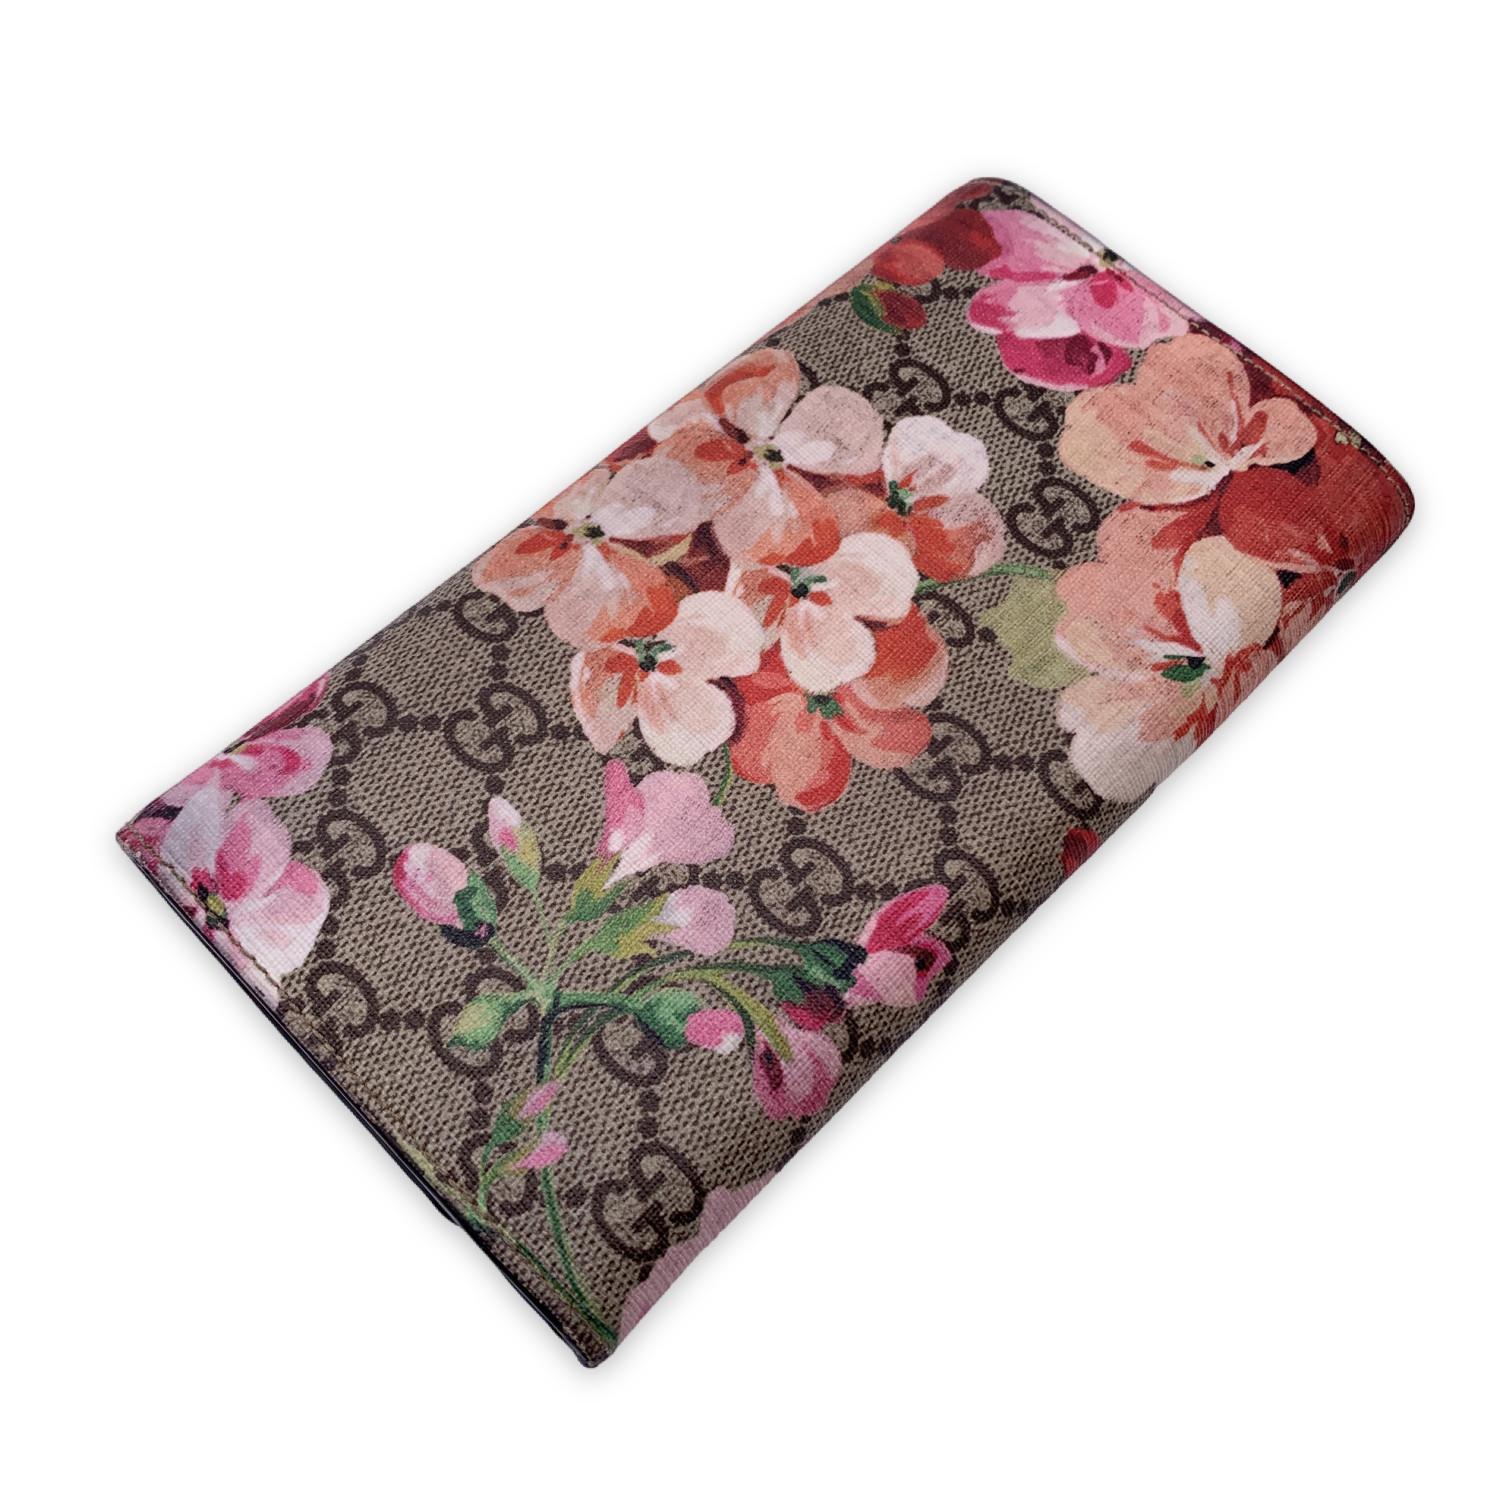 This beautiful Bag will come with a Certificate of Authenticity provided by Entrupy. The certificate will be provided at no further cost.

Beautiful Gucci 'Blooms' print continental continental wallet, crafted in Supreme coated canvas with pink